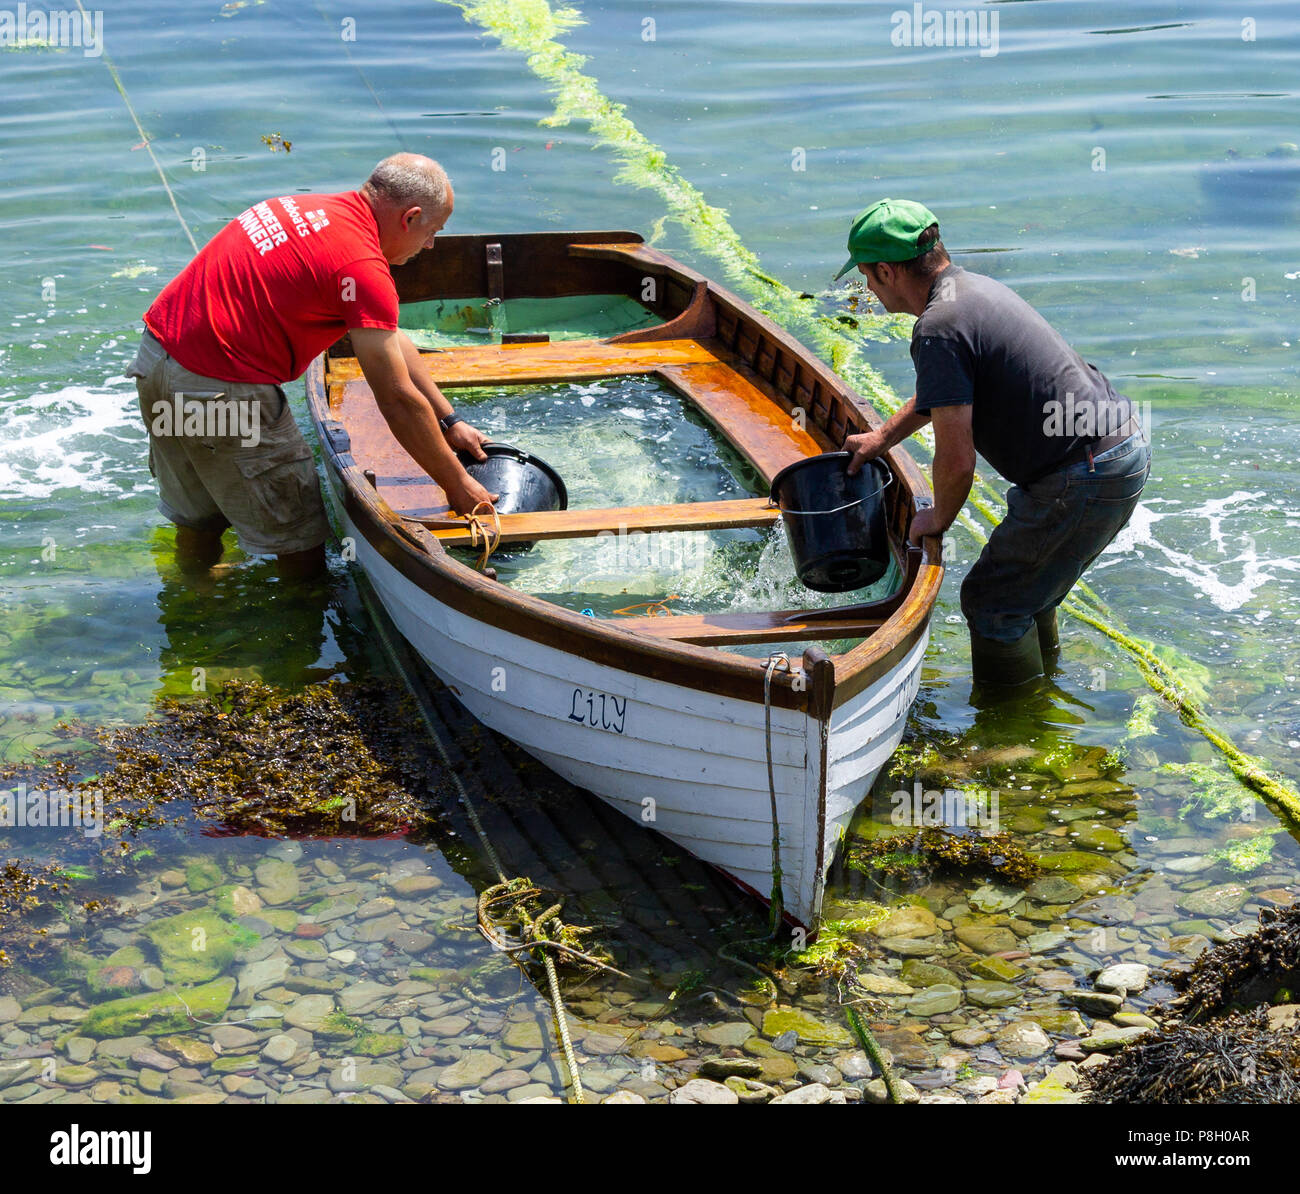 West Cork, Ireland. 11th July, 2018. The constant scorching sun has caused the clinker built wooden planks of the boat to shrink allowing seawater in. Leaving the hull flooded for a few days allows the wood to swell and become water tight, but it still needs bailing out!!  Credit: aphperspective/Alamy Live News Stock Photo